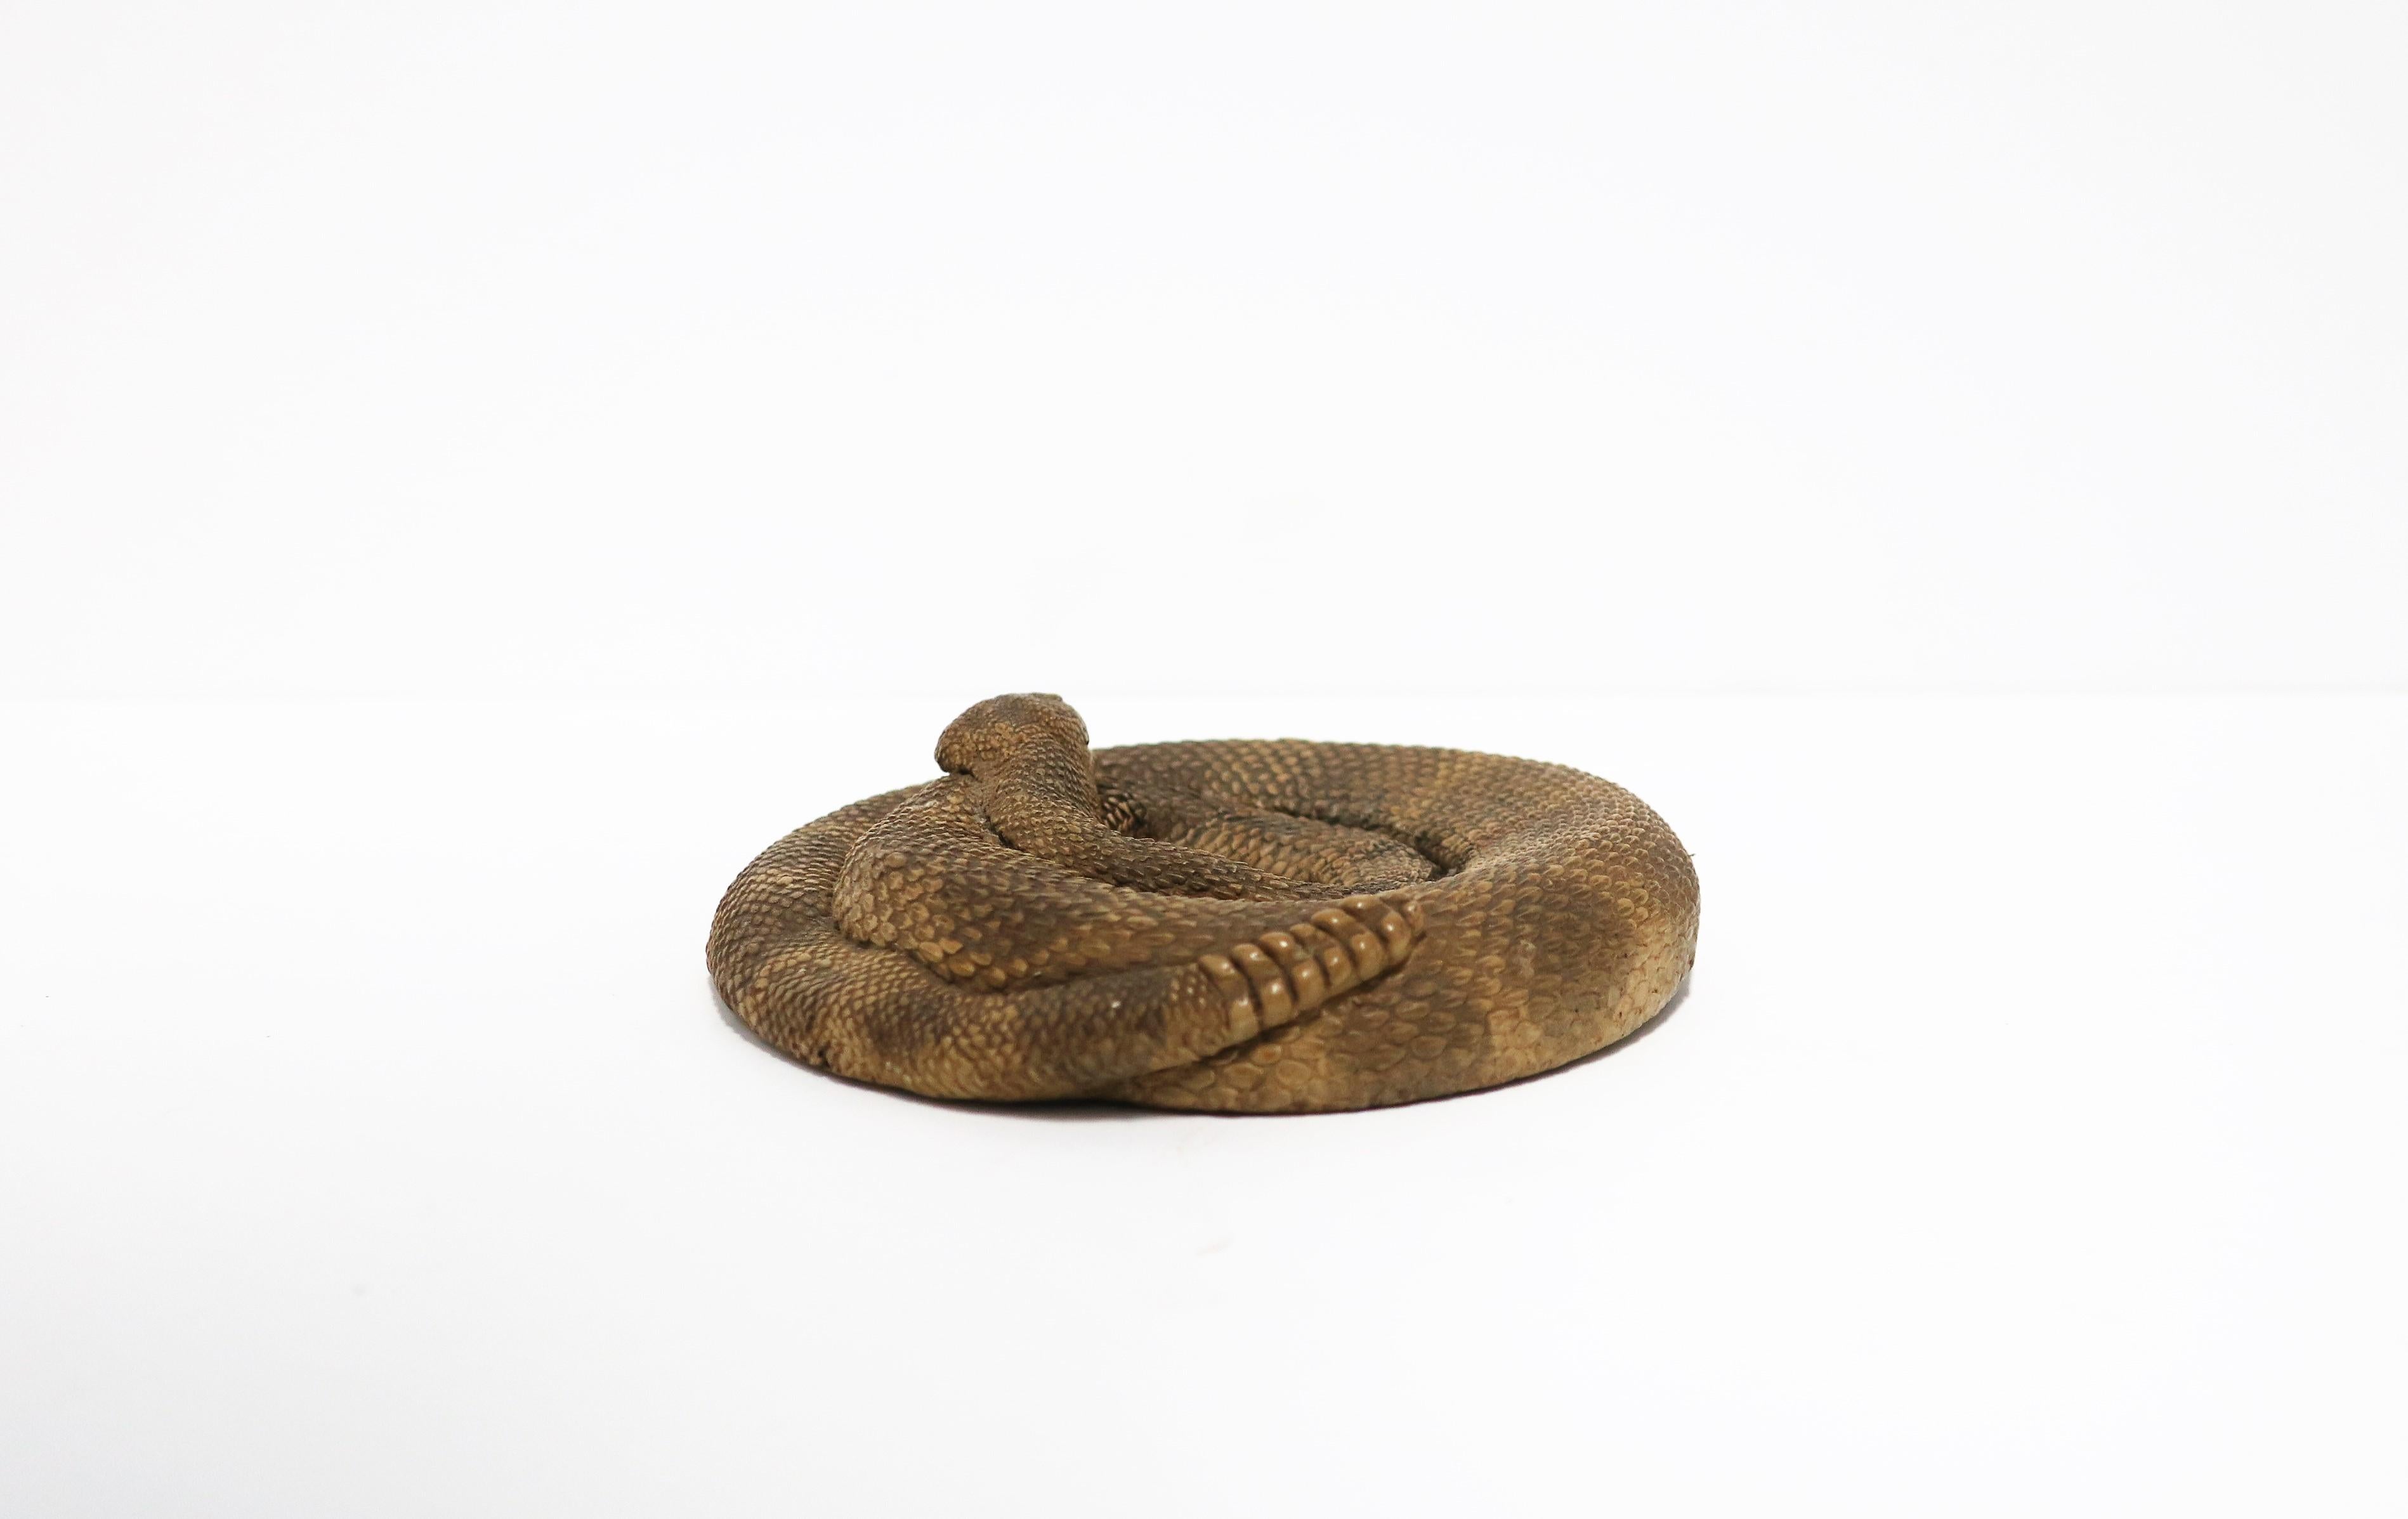 Coiled Rattle Snake, circa 1980s USA For Sale 1